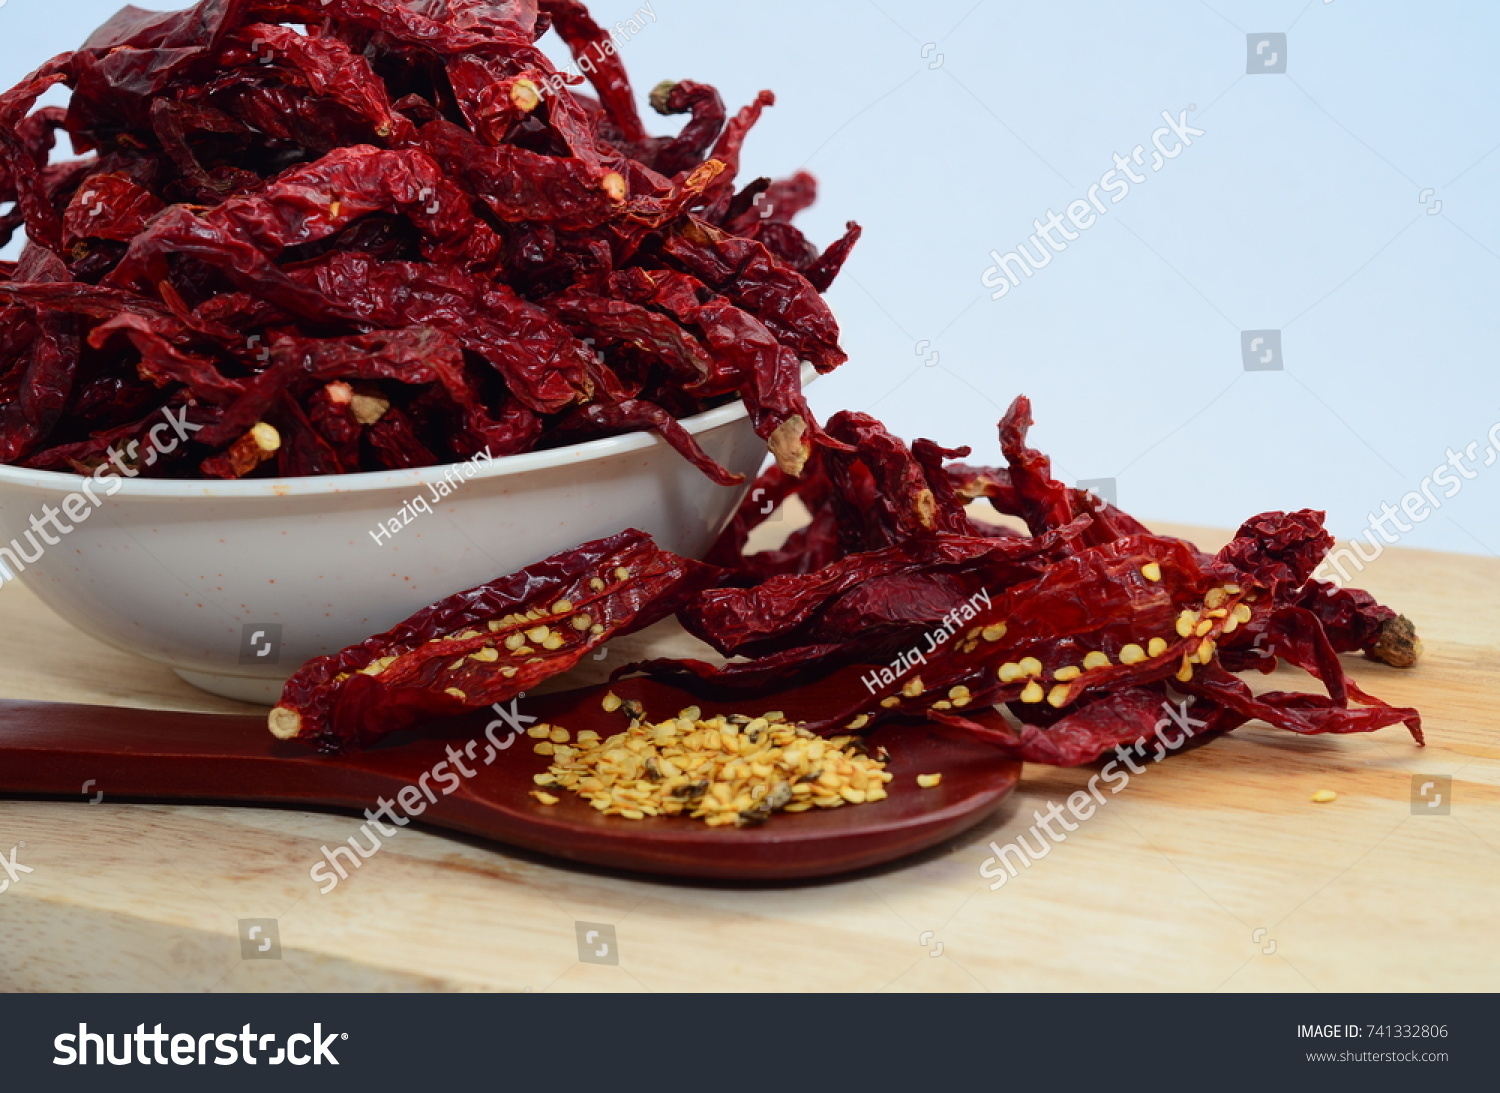 Dried Chili with chili seed on Cutting board inside the bowl #741332806